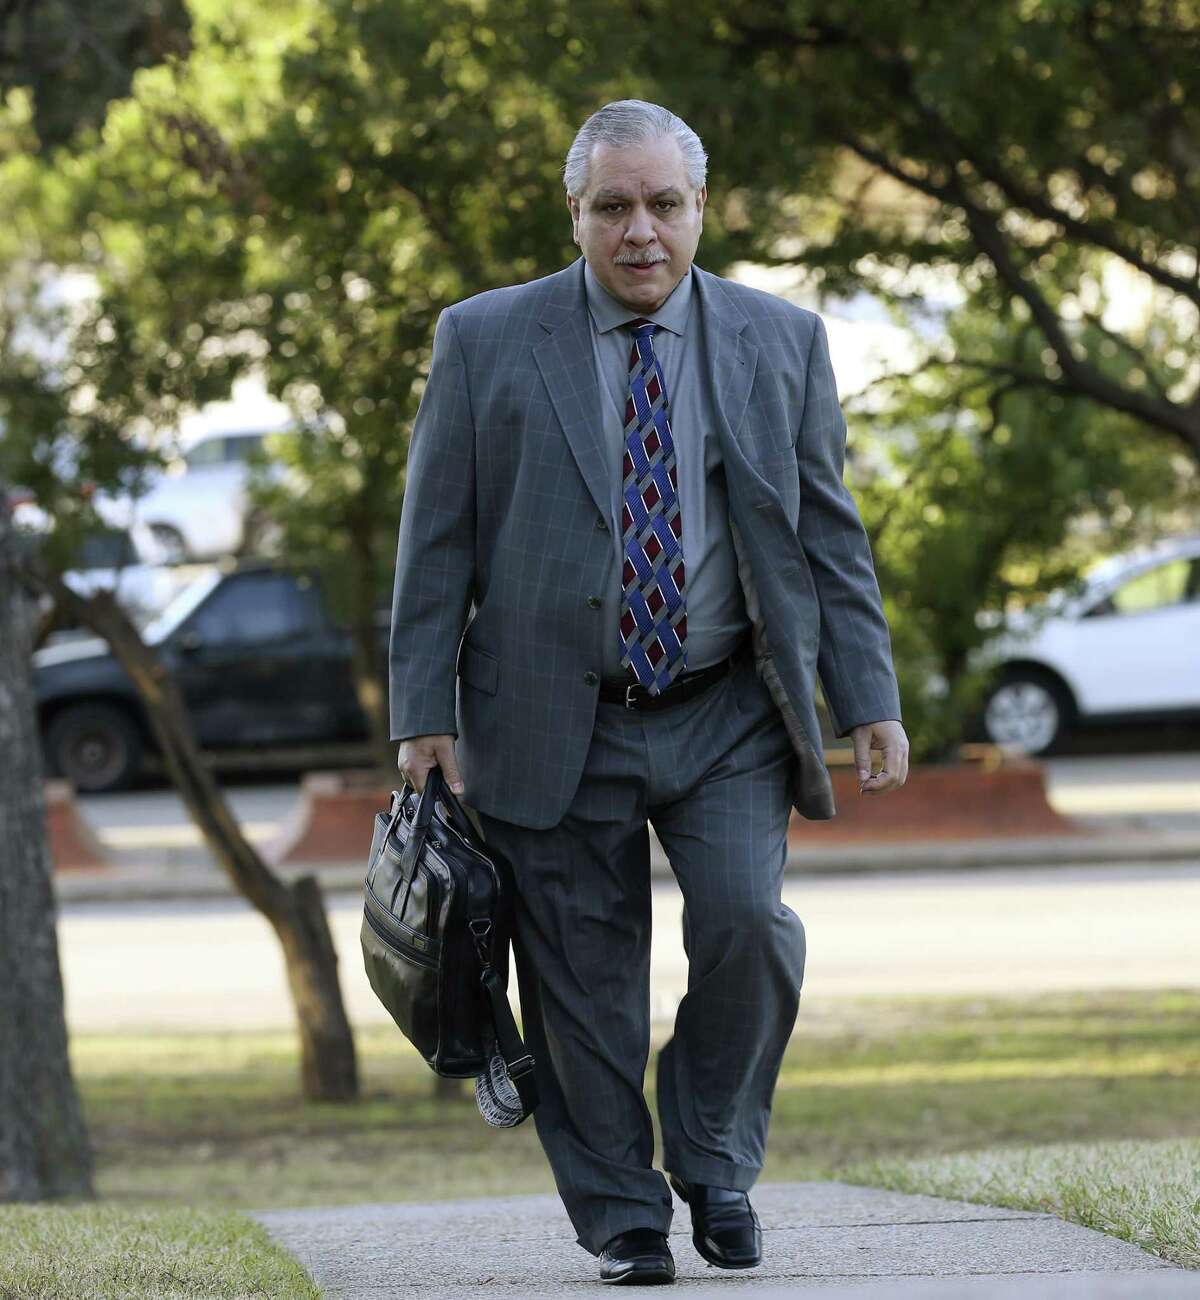 Gary Cain, state Sen. Carlos Uresti’s co-defendant in a criminal fraud trial in San Antonio federal court, is facing nine felony charges.